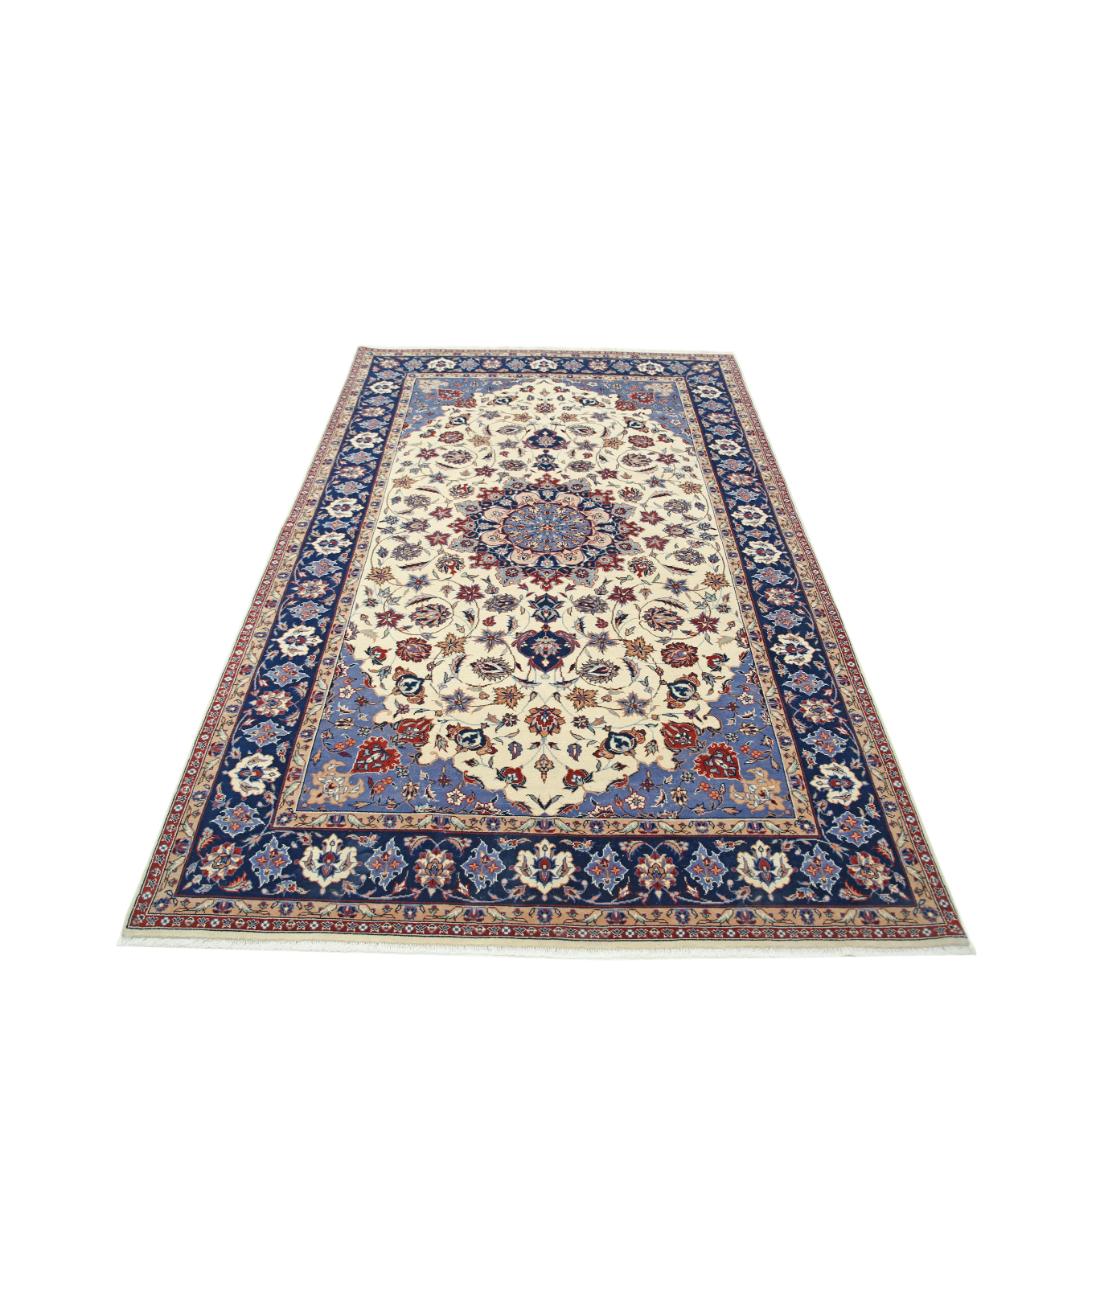 Heritage 5' 0" X 7' 10" Hand-Knotted Wool Rug 5' 0" X 7' 10" (152 X 239) / Ivory / Blue